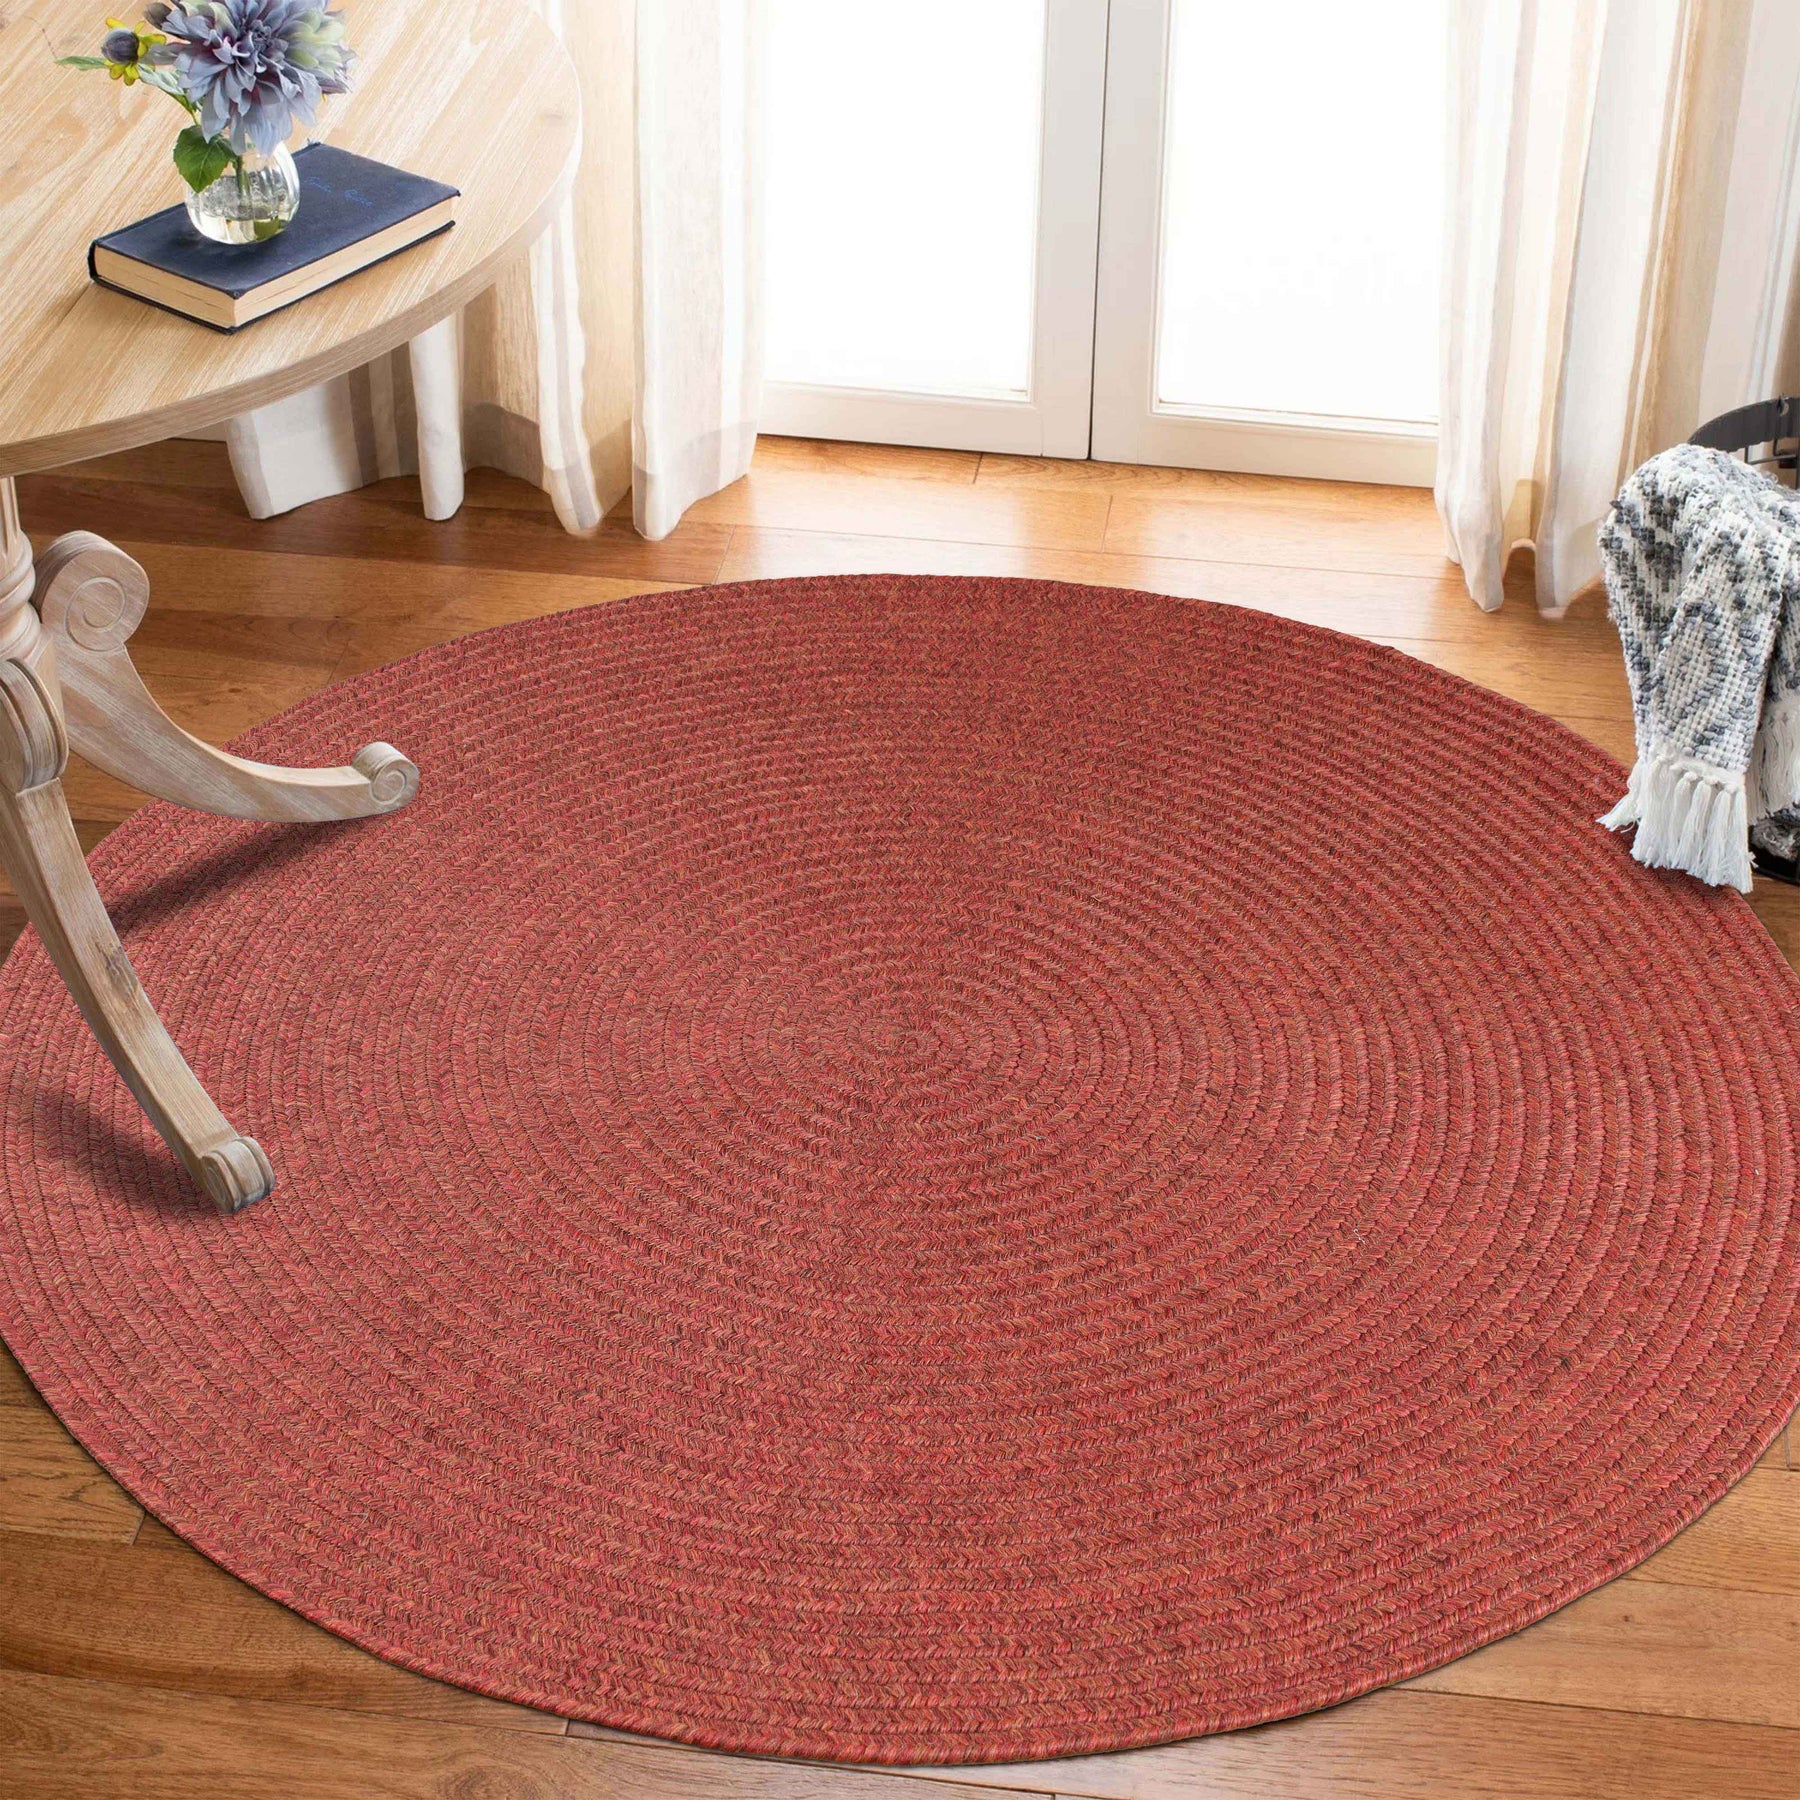 Bohemian Braided Indoor Outdoor Rugs Solid Round Area Rug - Brick